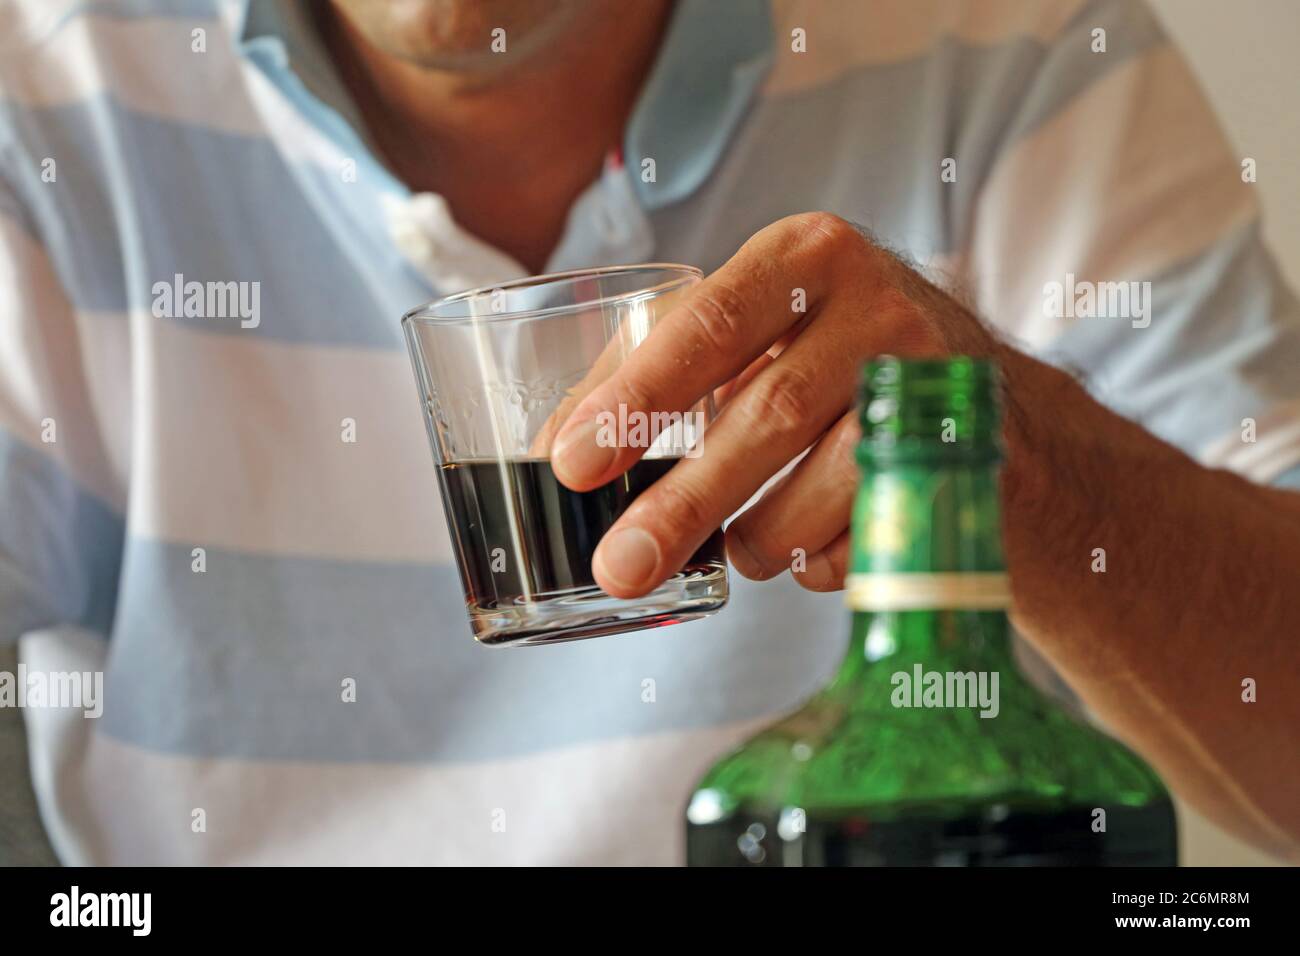 Symbol image: Man with drinking problems at home (Model released) Stock Photo